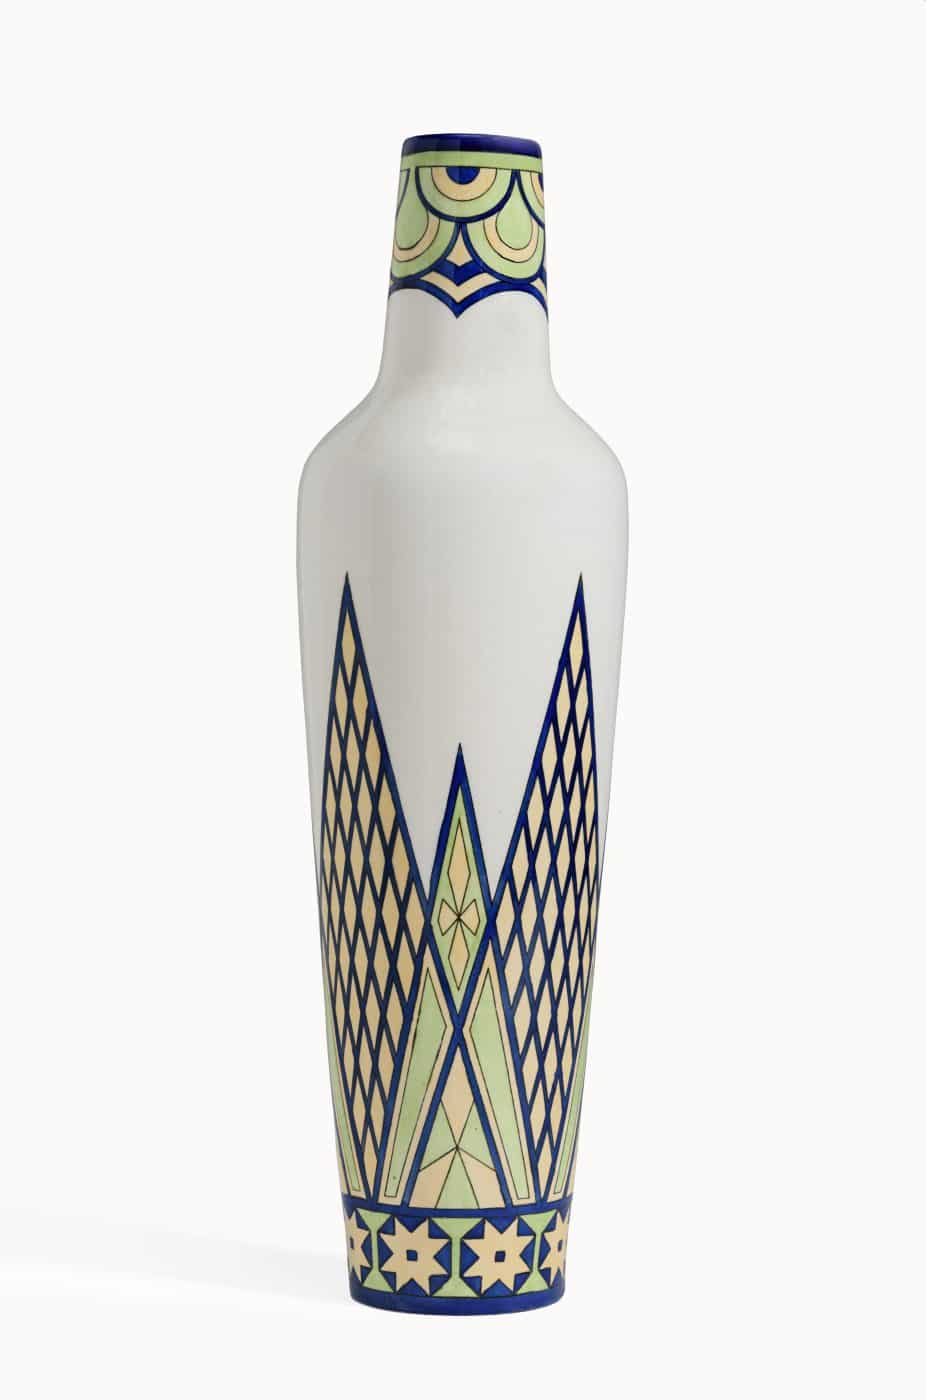 A white vase by Finnish company Arabia with a blue, yellow and light-green design